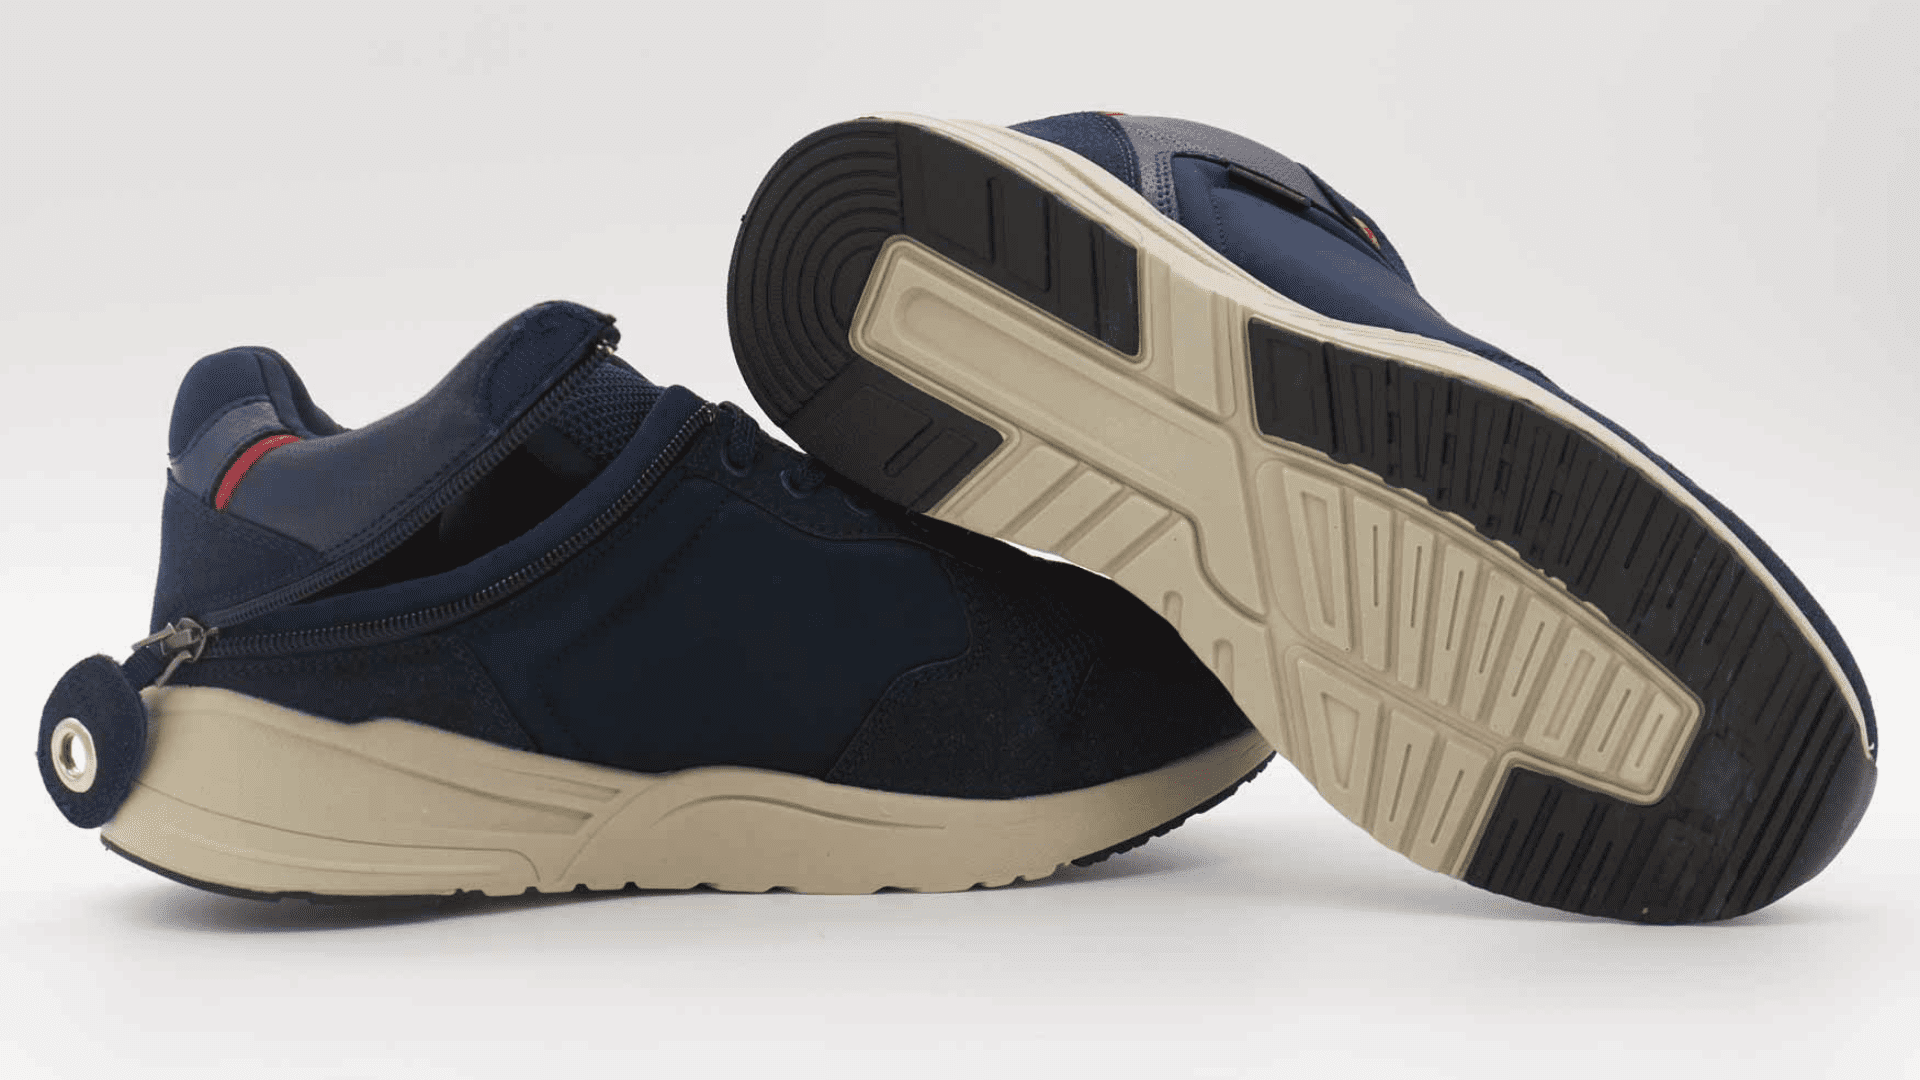 A lifestlye image of Friendly Shoes Voyage – Navy/Peach Casual Shoes. These shoes are designed to be easy-on-and-off to assist with quality of life. 
